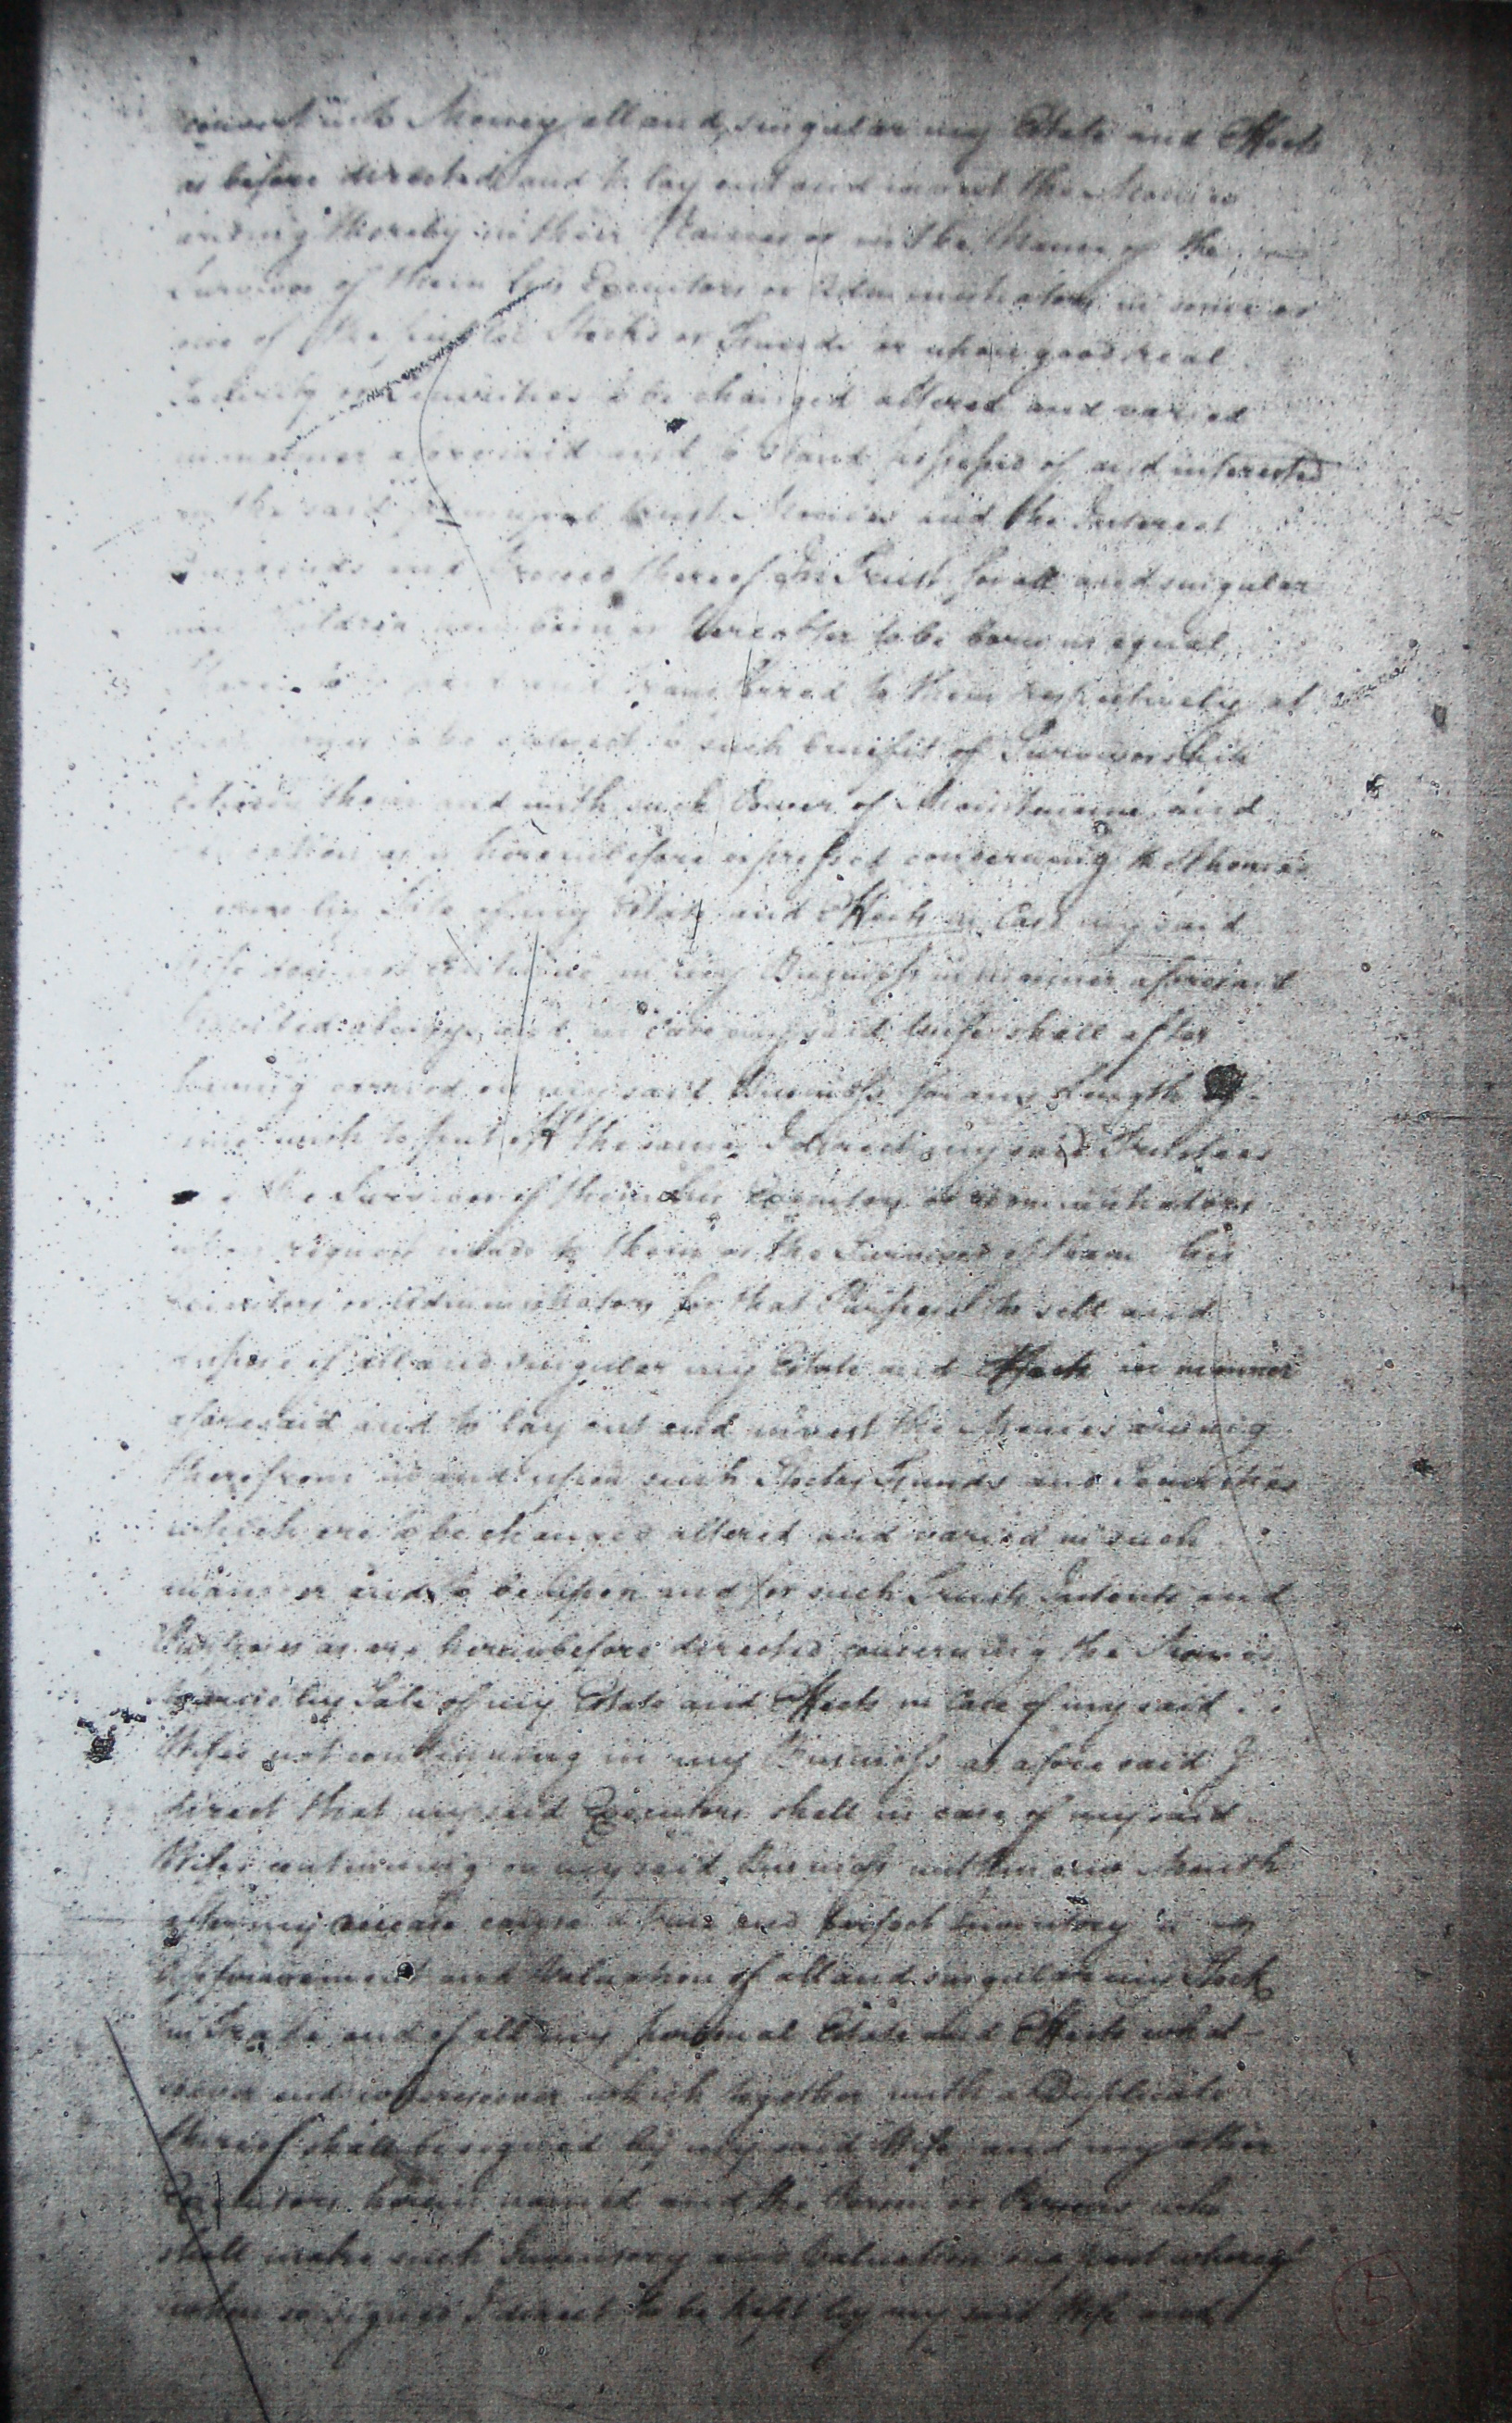 The will of Richard Balls, 1798, page 5